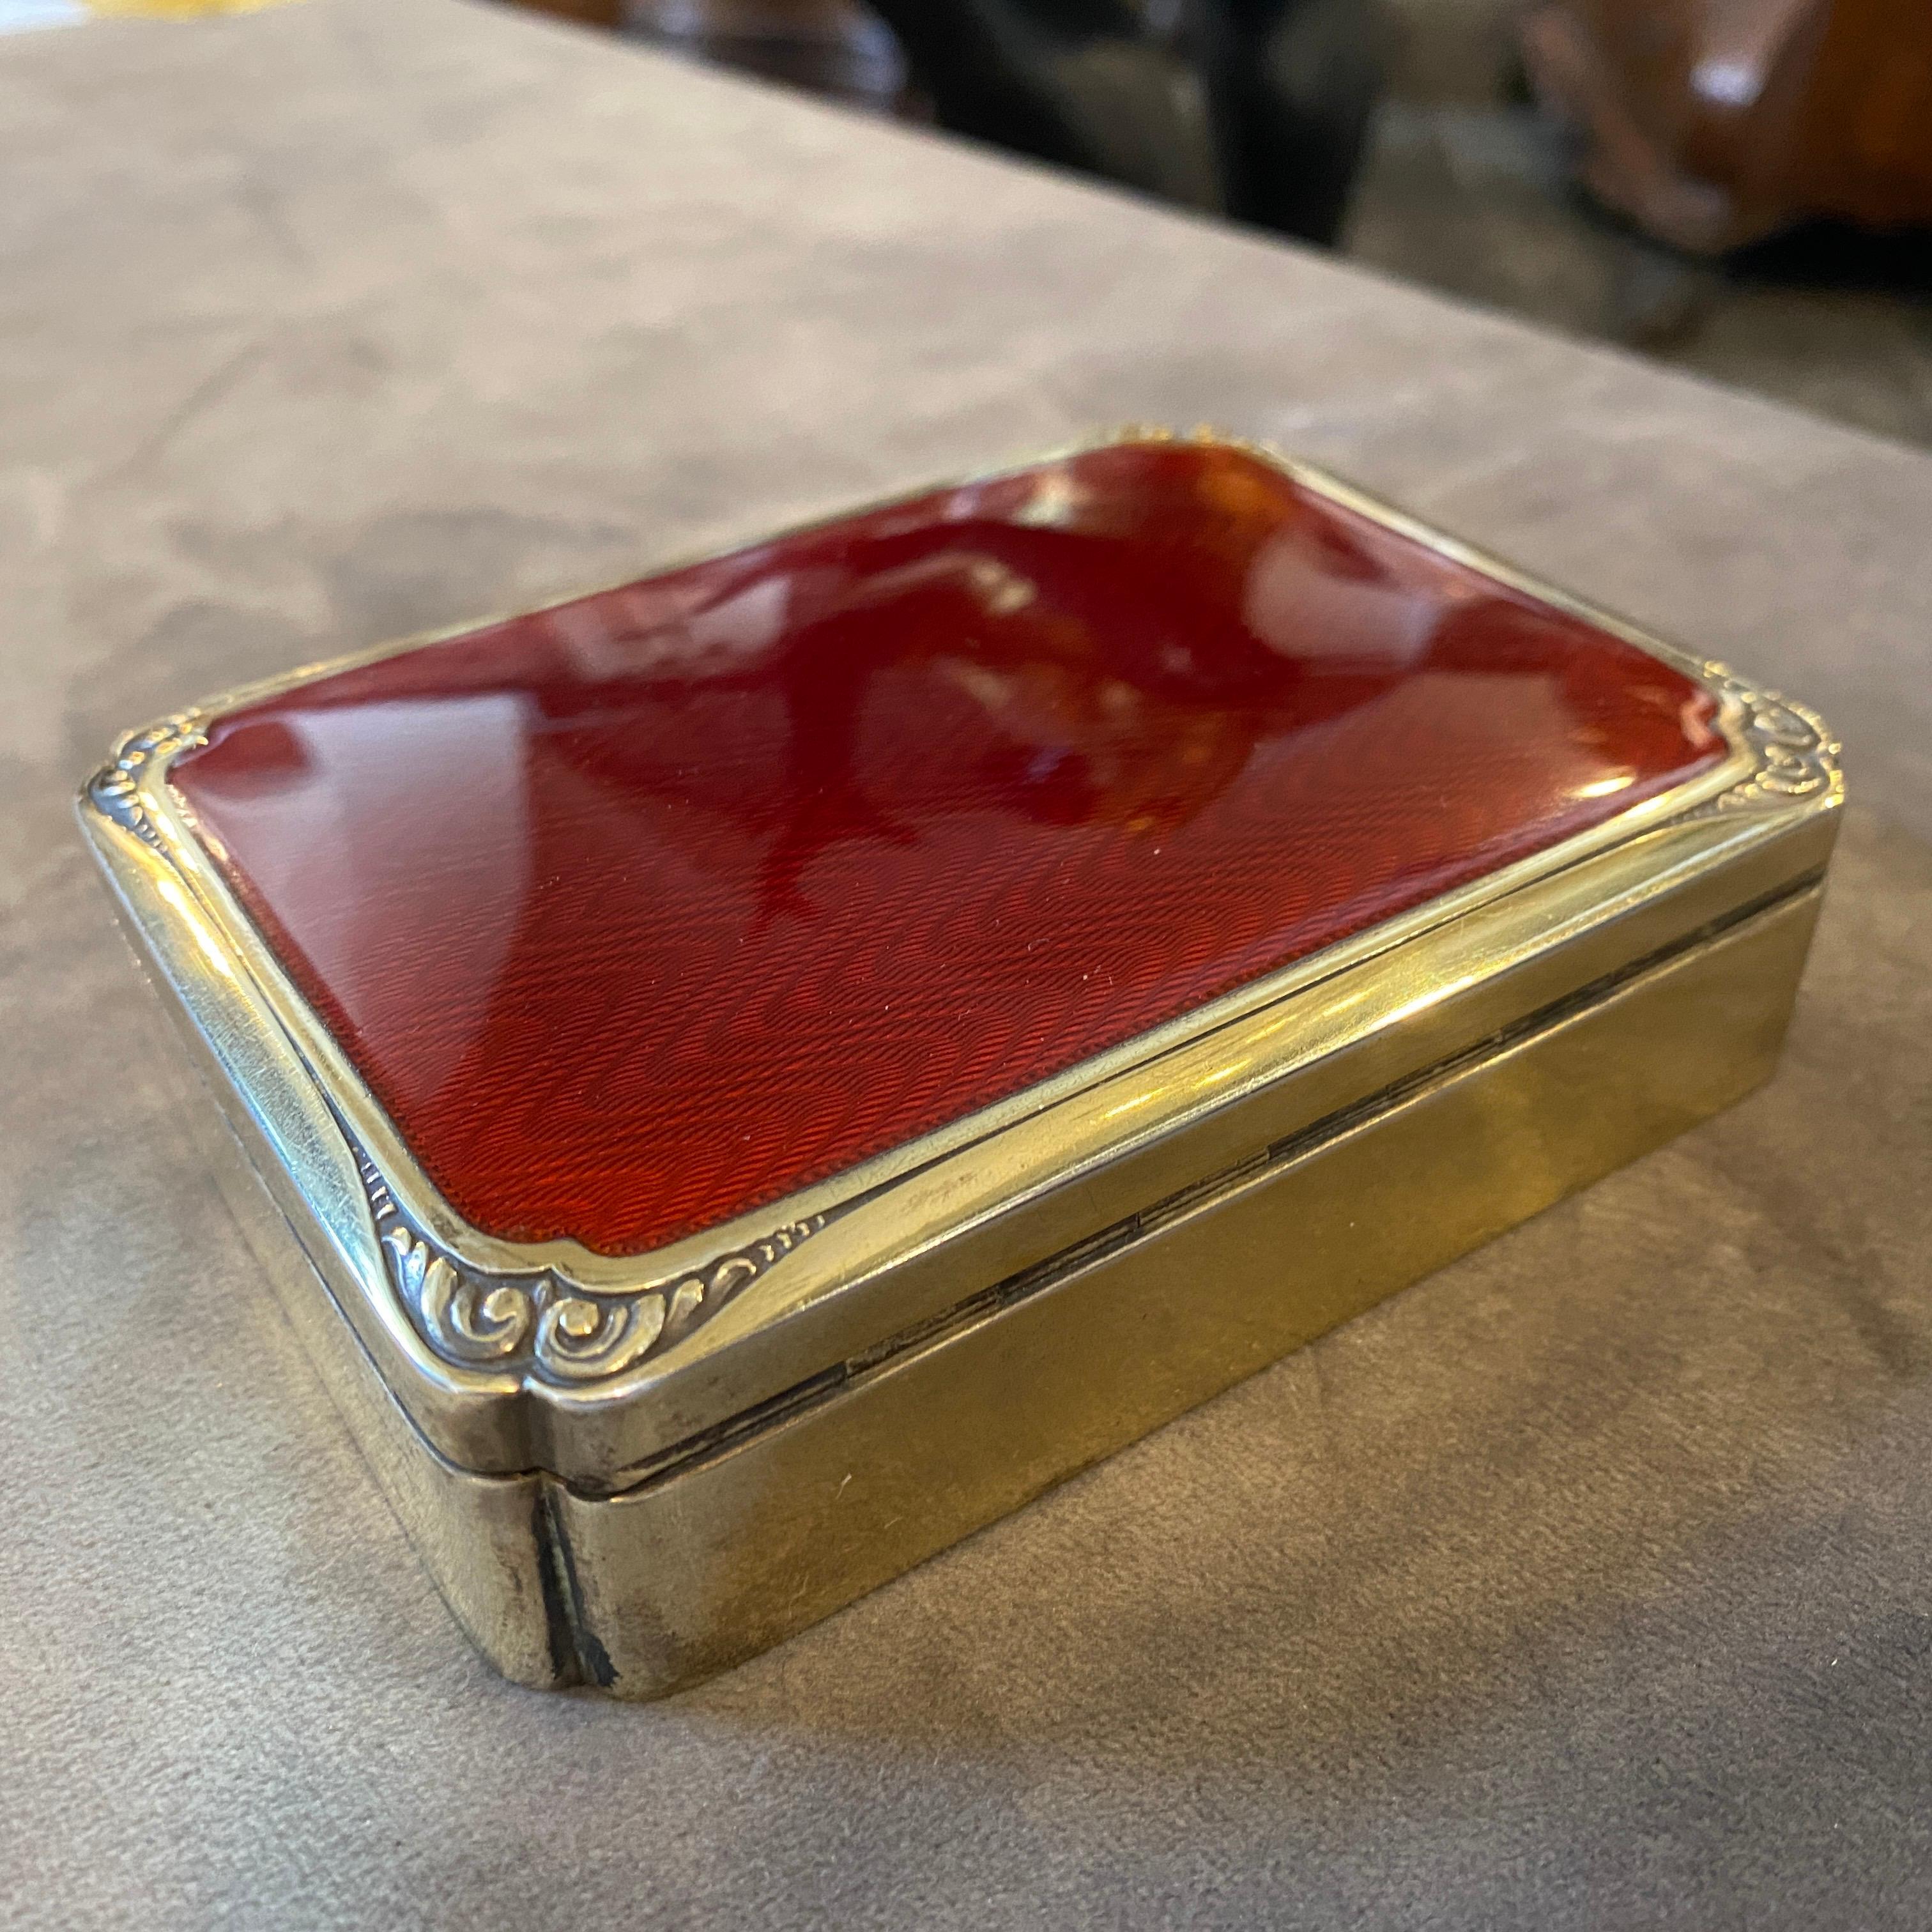 A superb quality red enameled cigarette box made in Italy in the Seventies by Salimbeni, famous manufacturer. It's all marked vermeil solid silver.